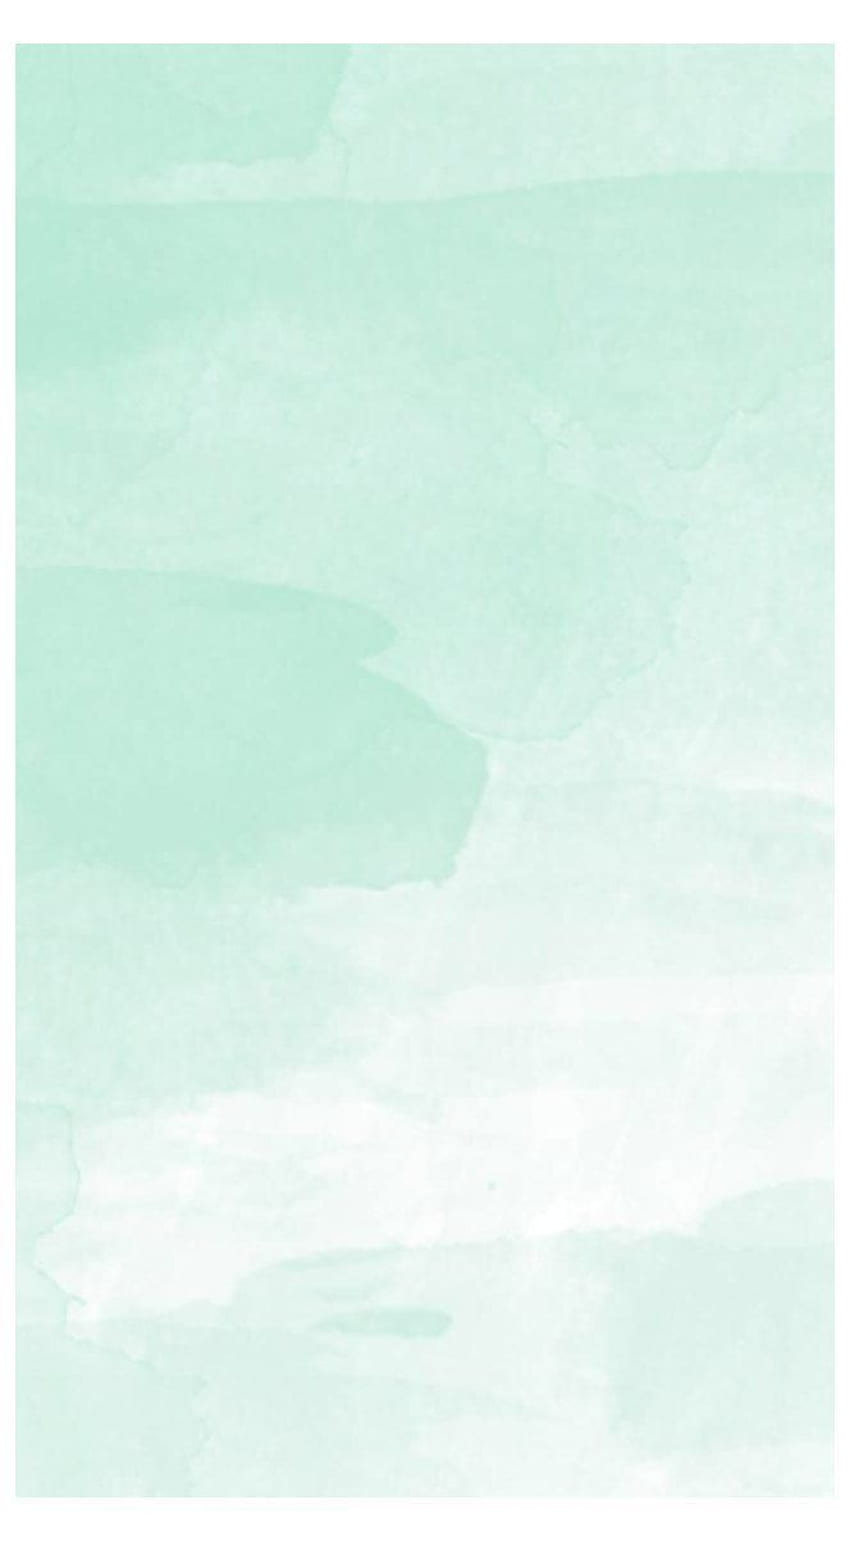 Mint Green Background For iPhone in 2021. Mint , Mint green , Mint green iphone, Aesthetic Pastel Mint HD電話の壁紙